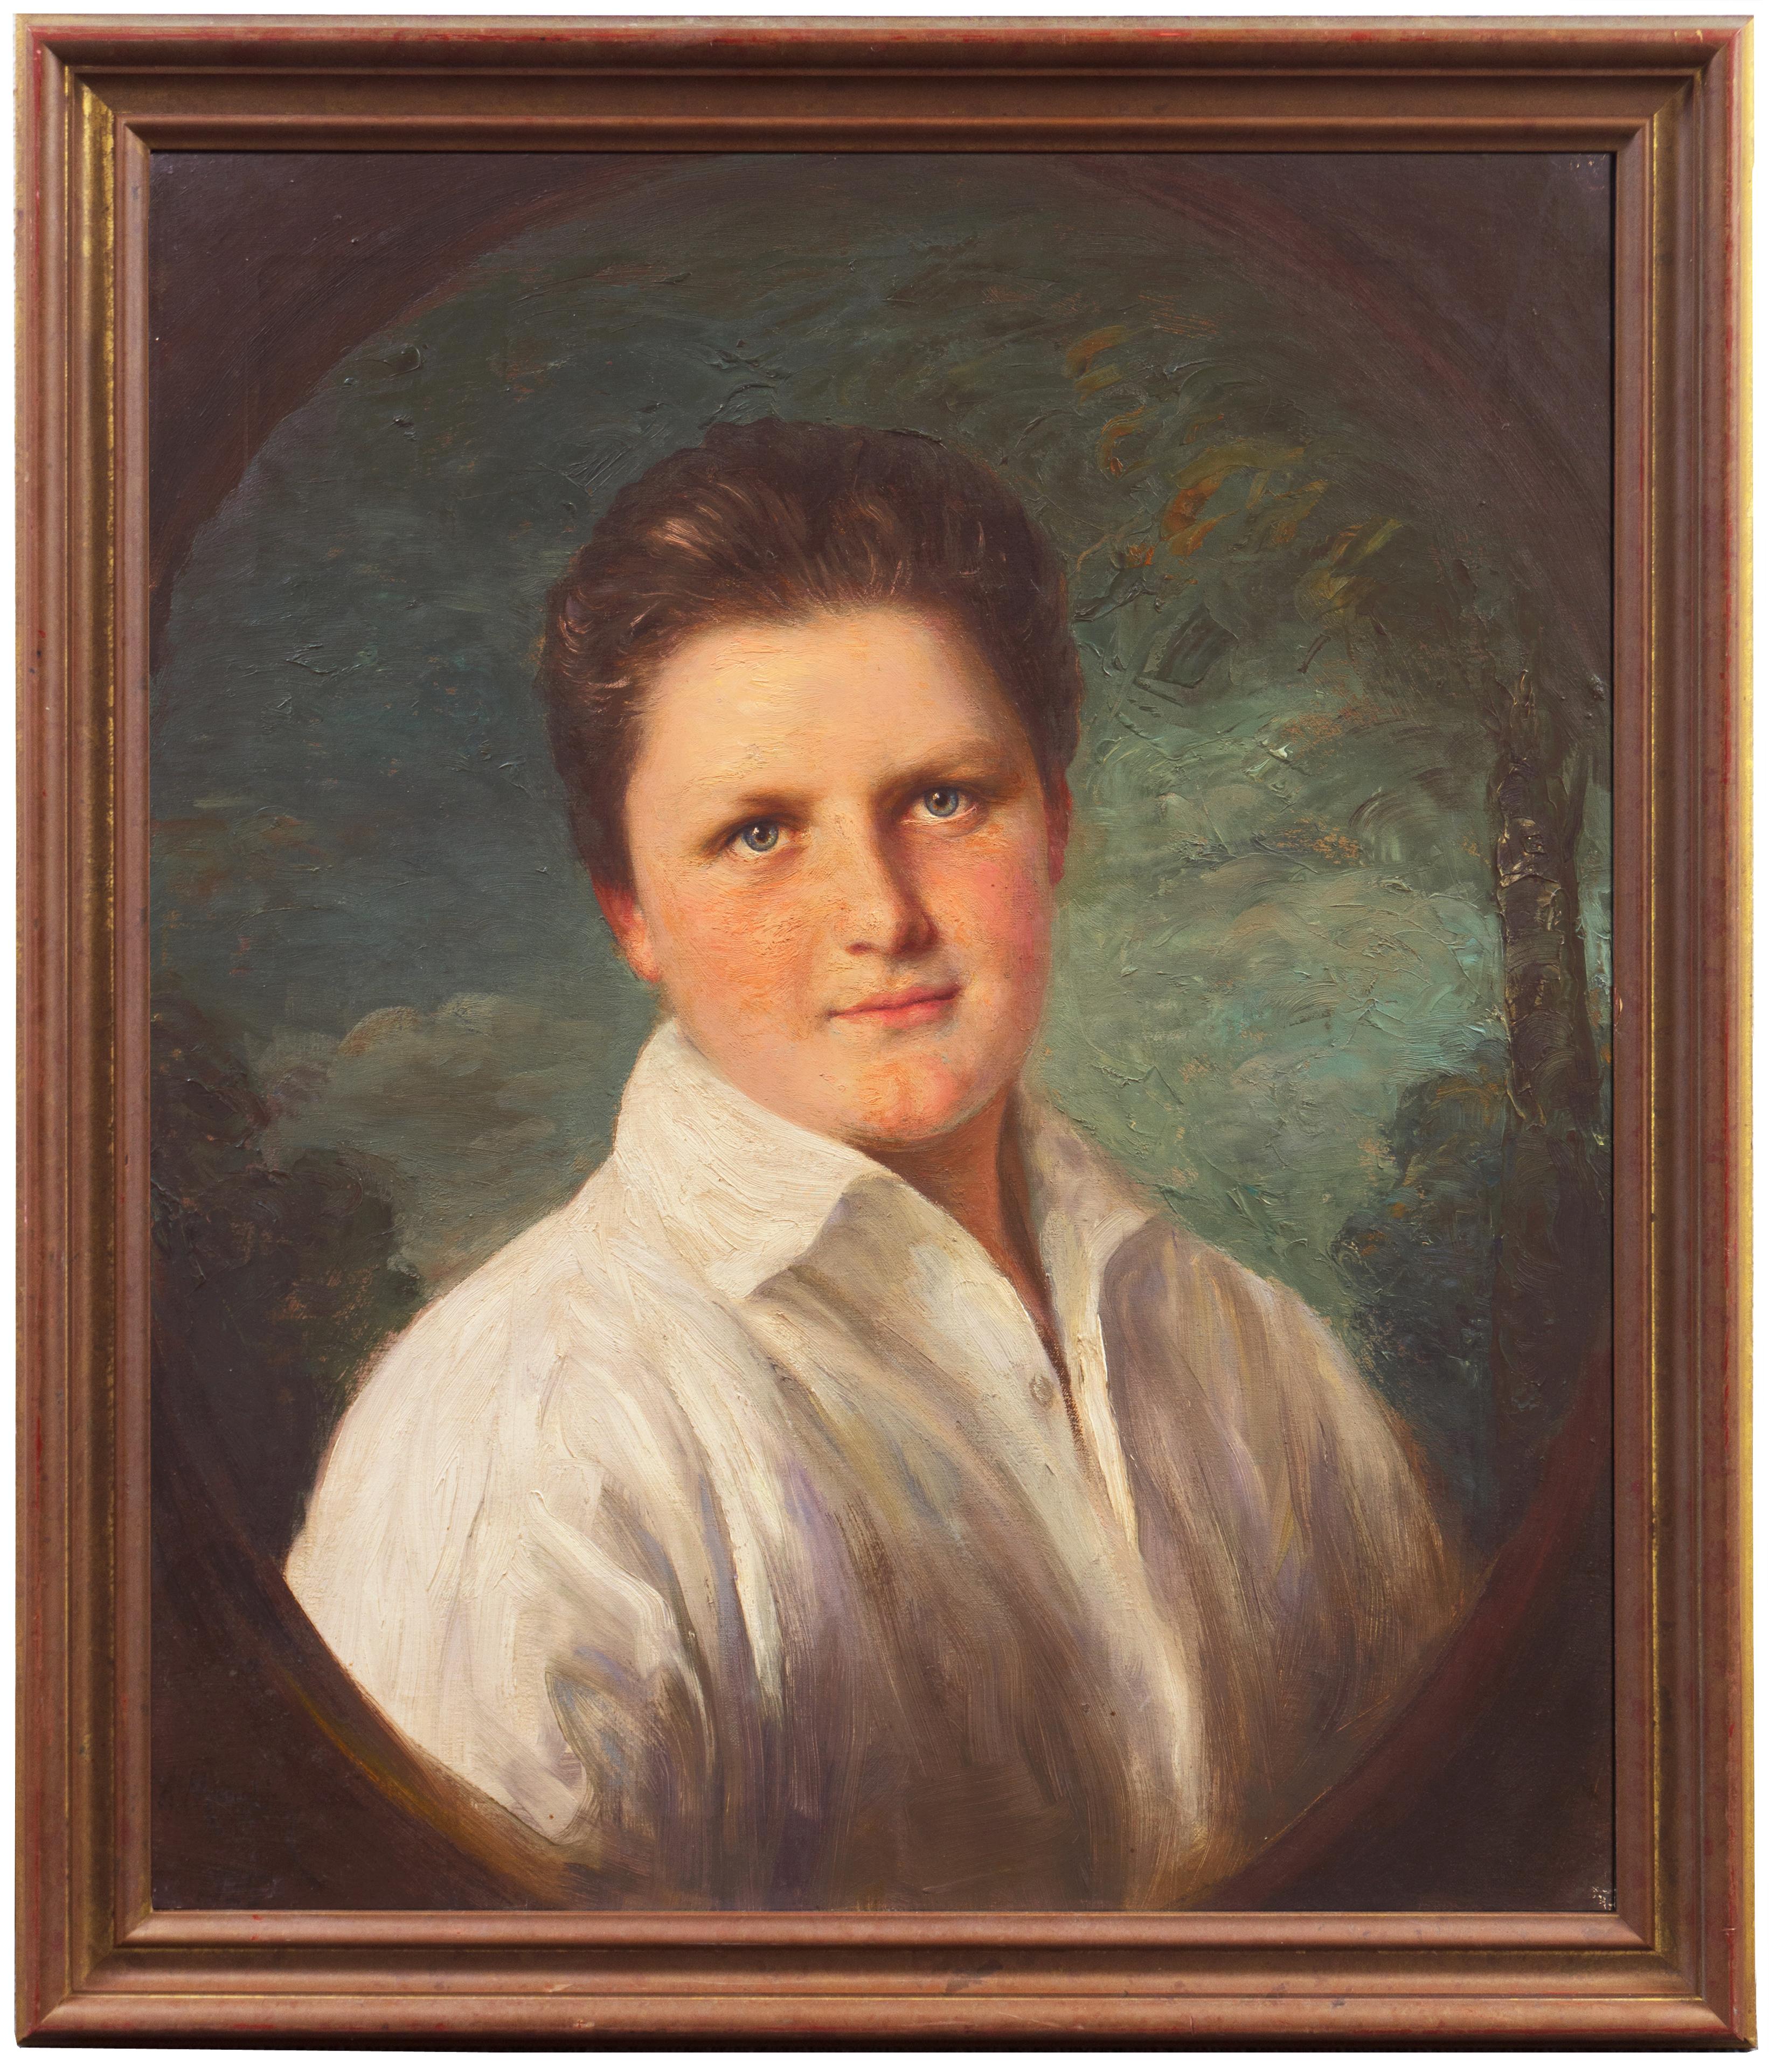 'Portrait of a Young Man', Munich Royal Academy, National Museum of American Art